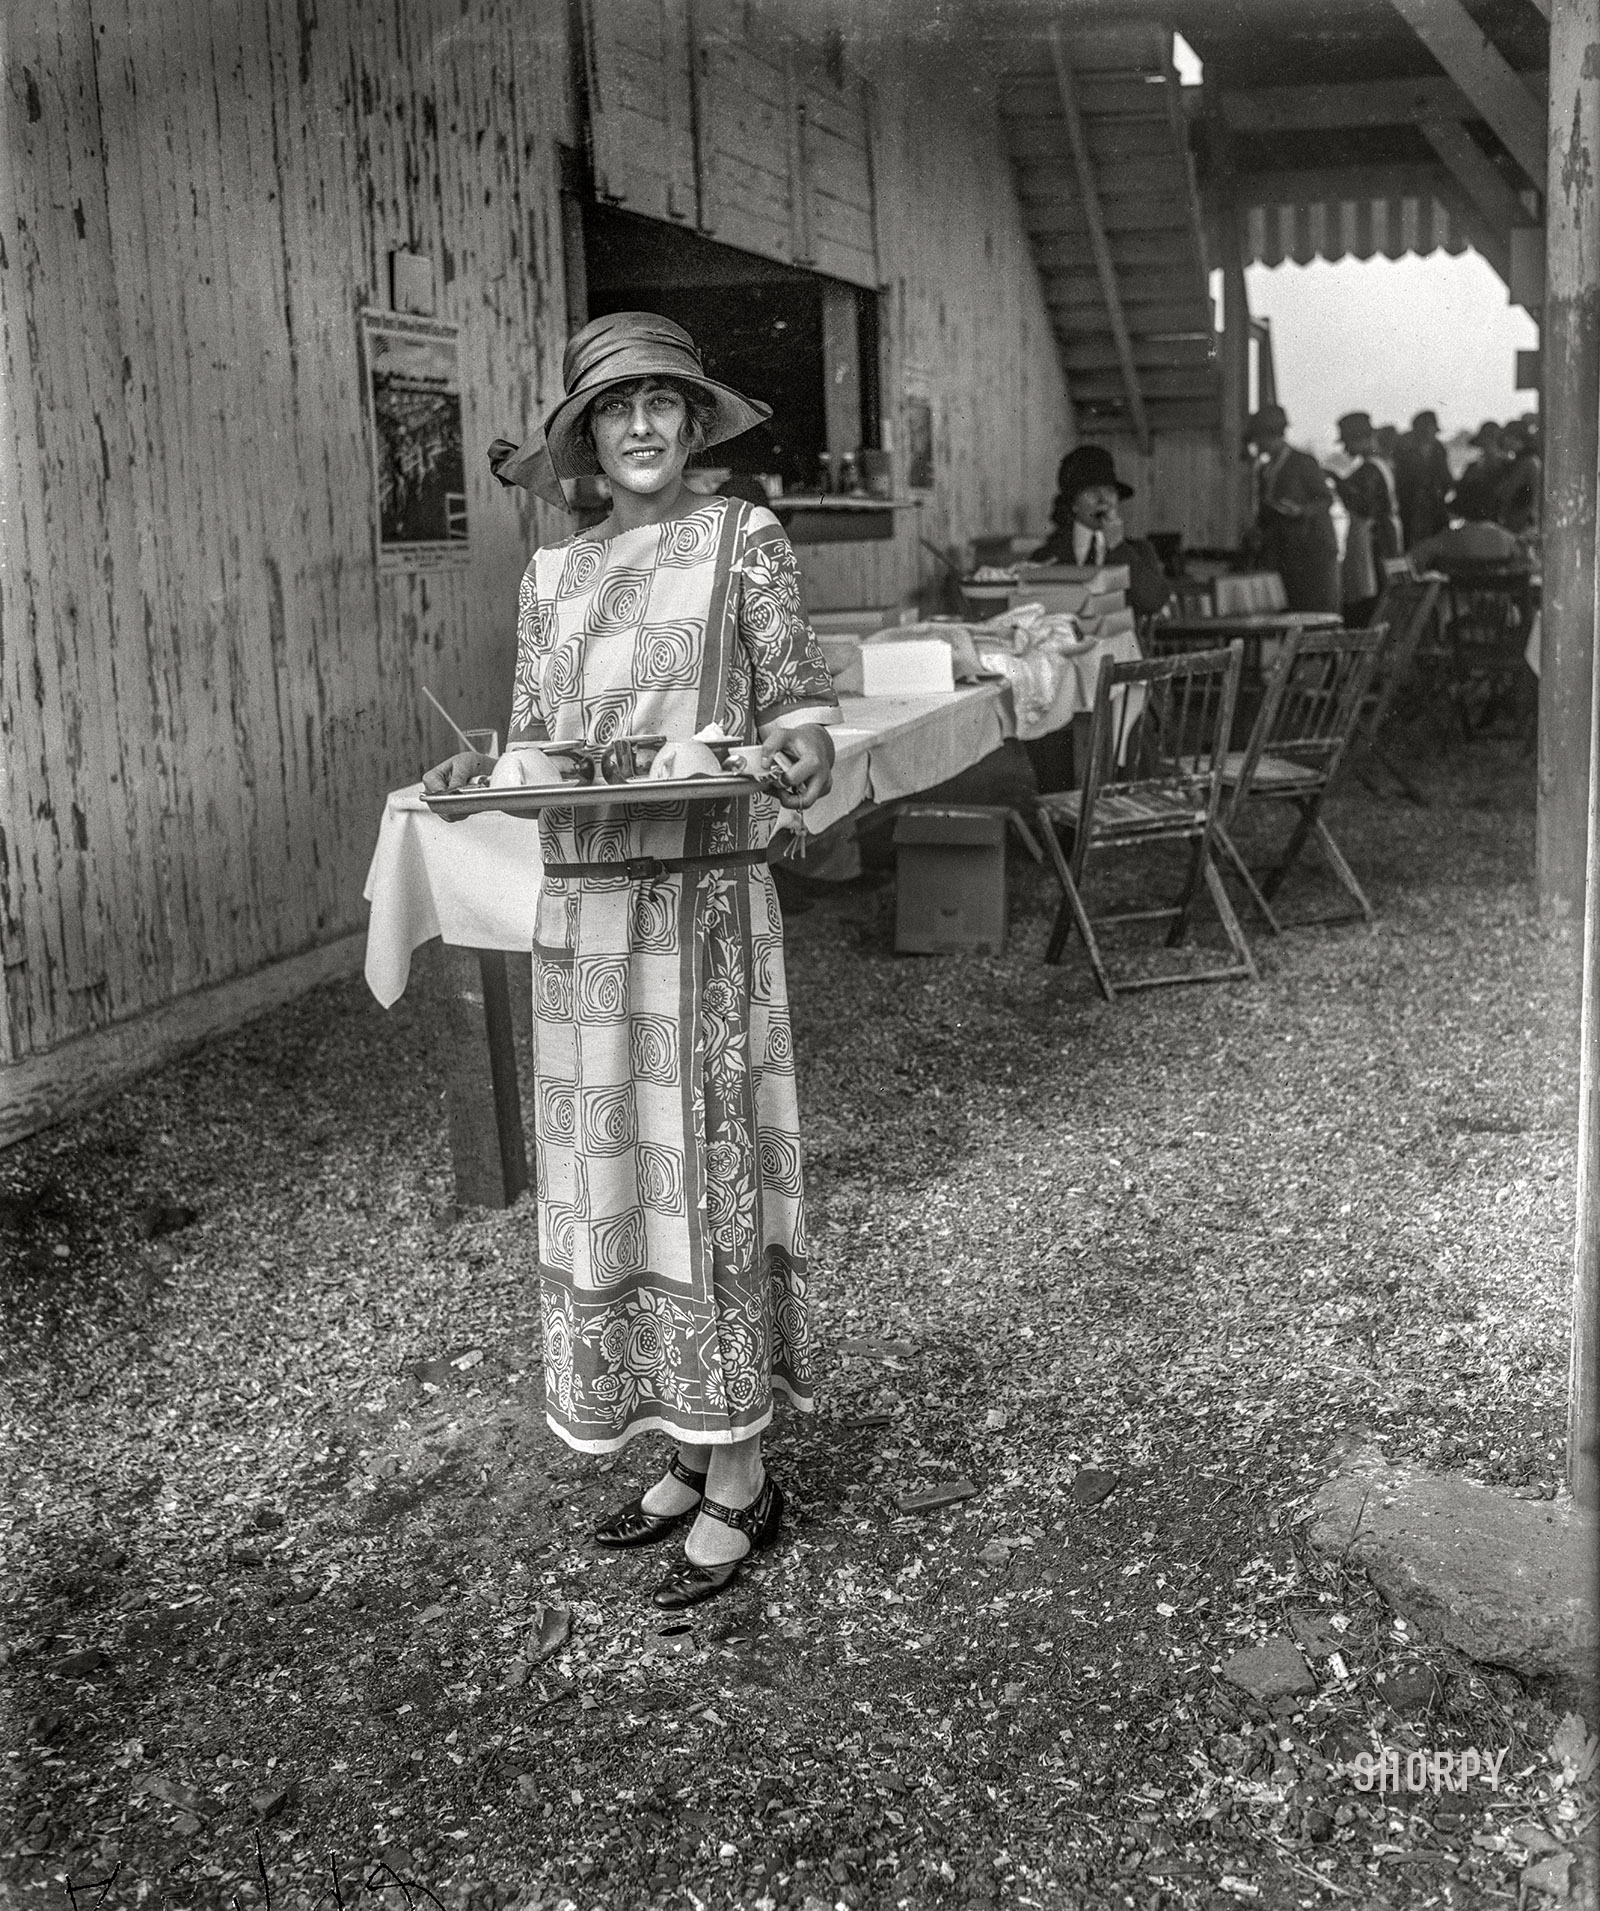 May 16, 1923. "Arlington Park, Virginia. Evelyn Wadsworth, daughter of Senator and Mrs. Wadsworth of New York, serving cold drinks at the National Capital Horse Show." Harris & Ewing Collection glass negative. View full size.